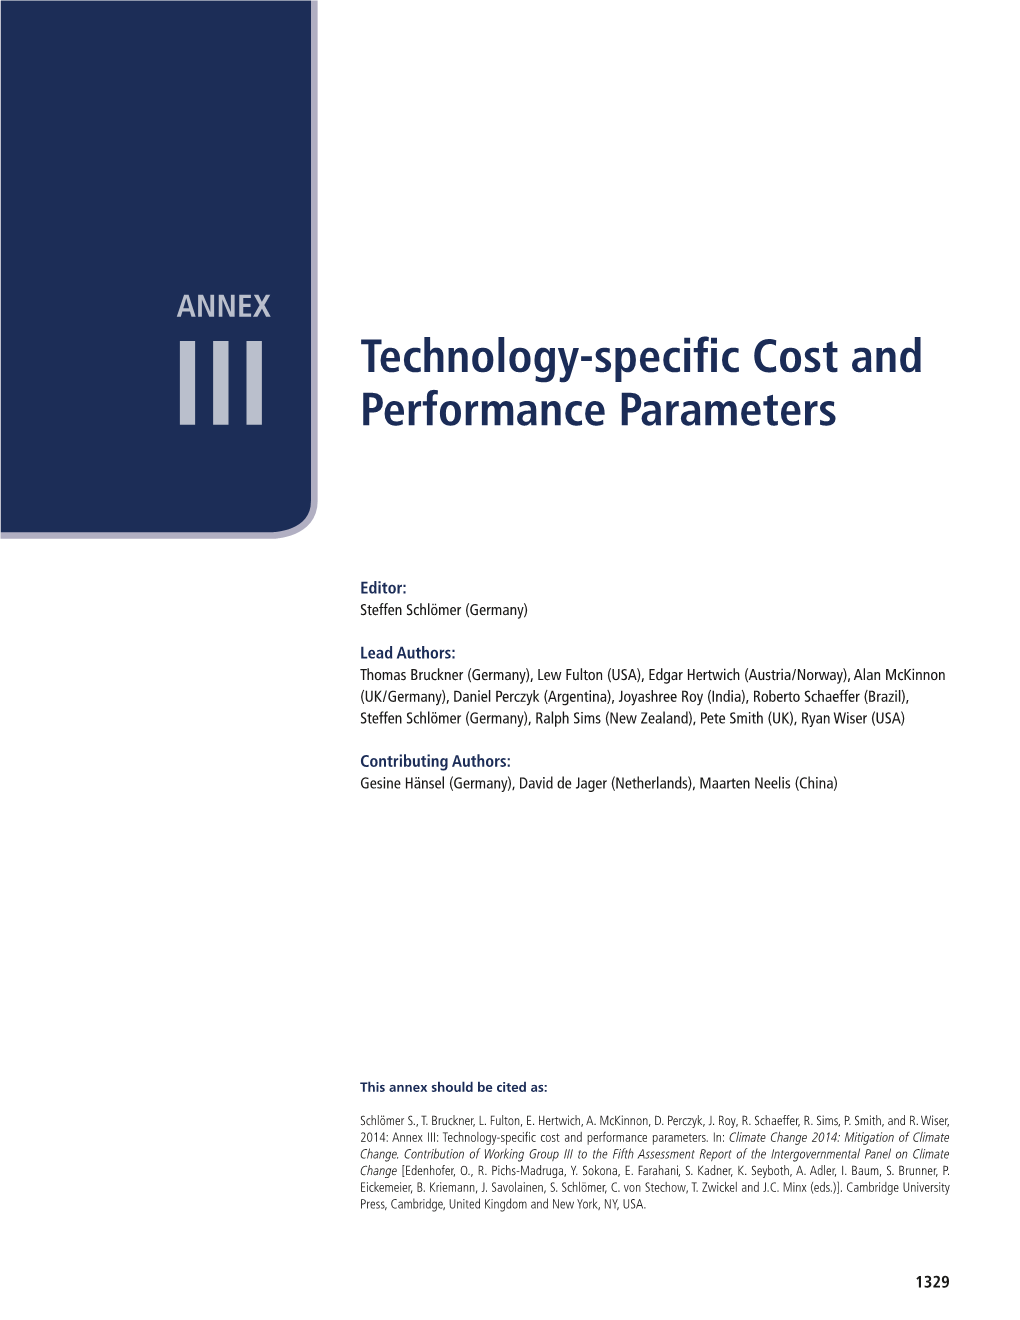 Annex III: Technology-Specific Cost and Performance Parameters